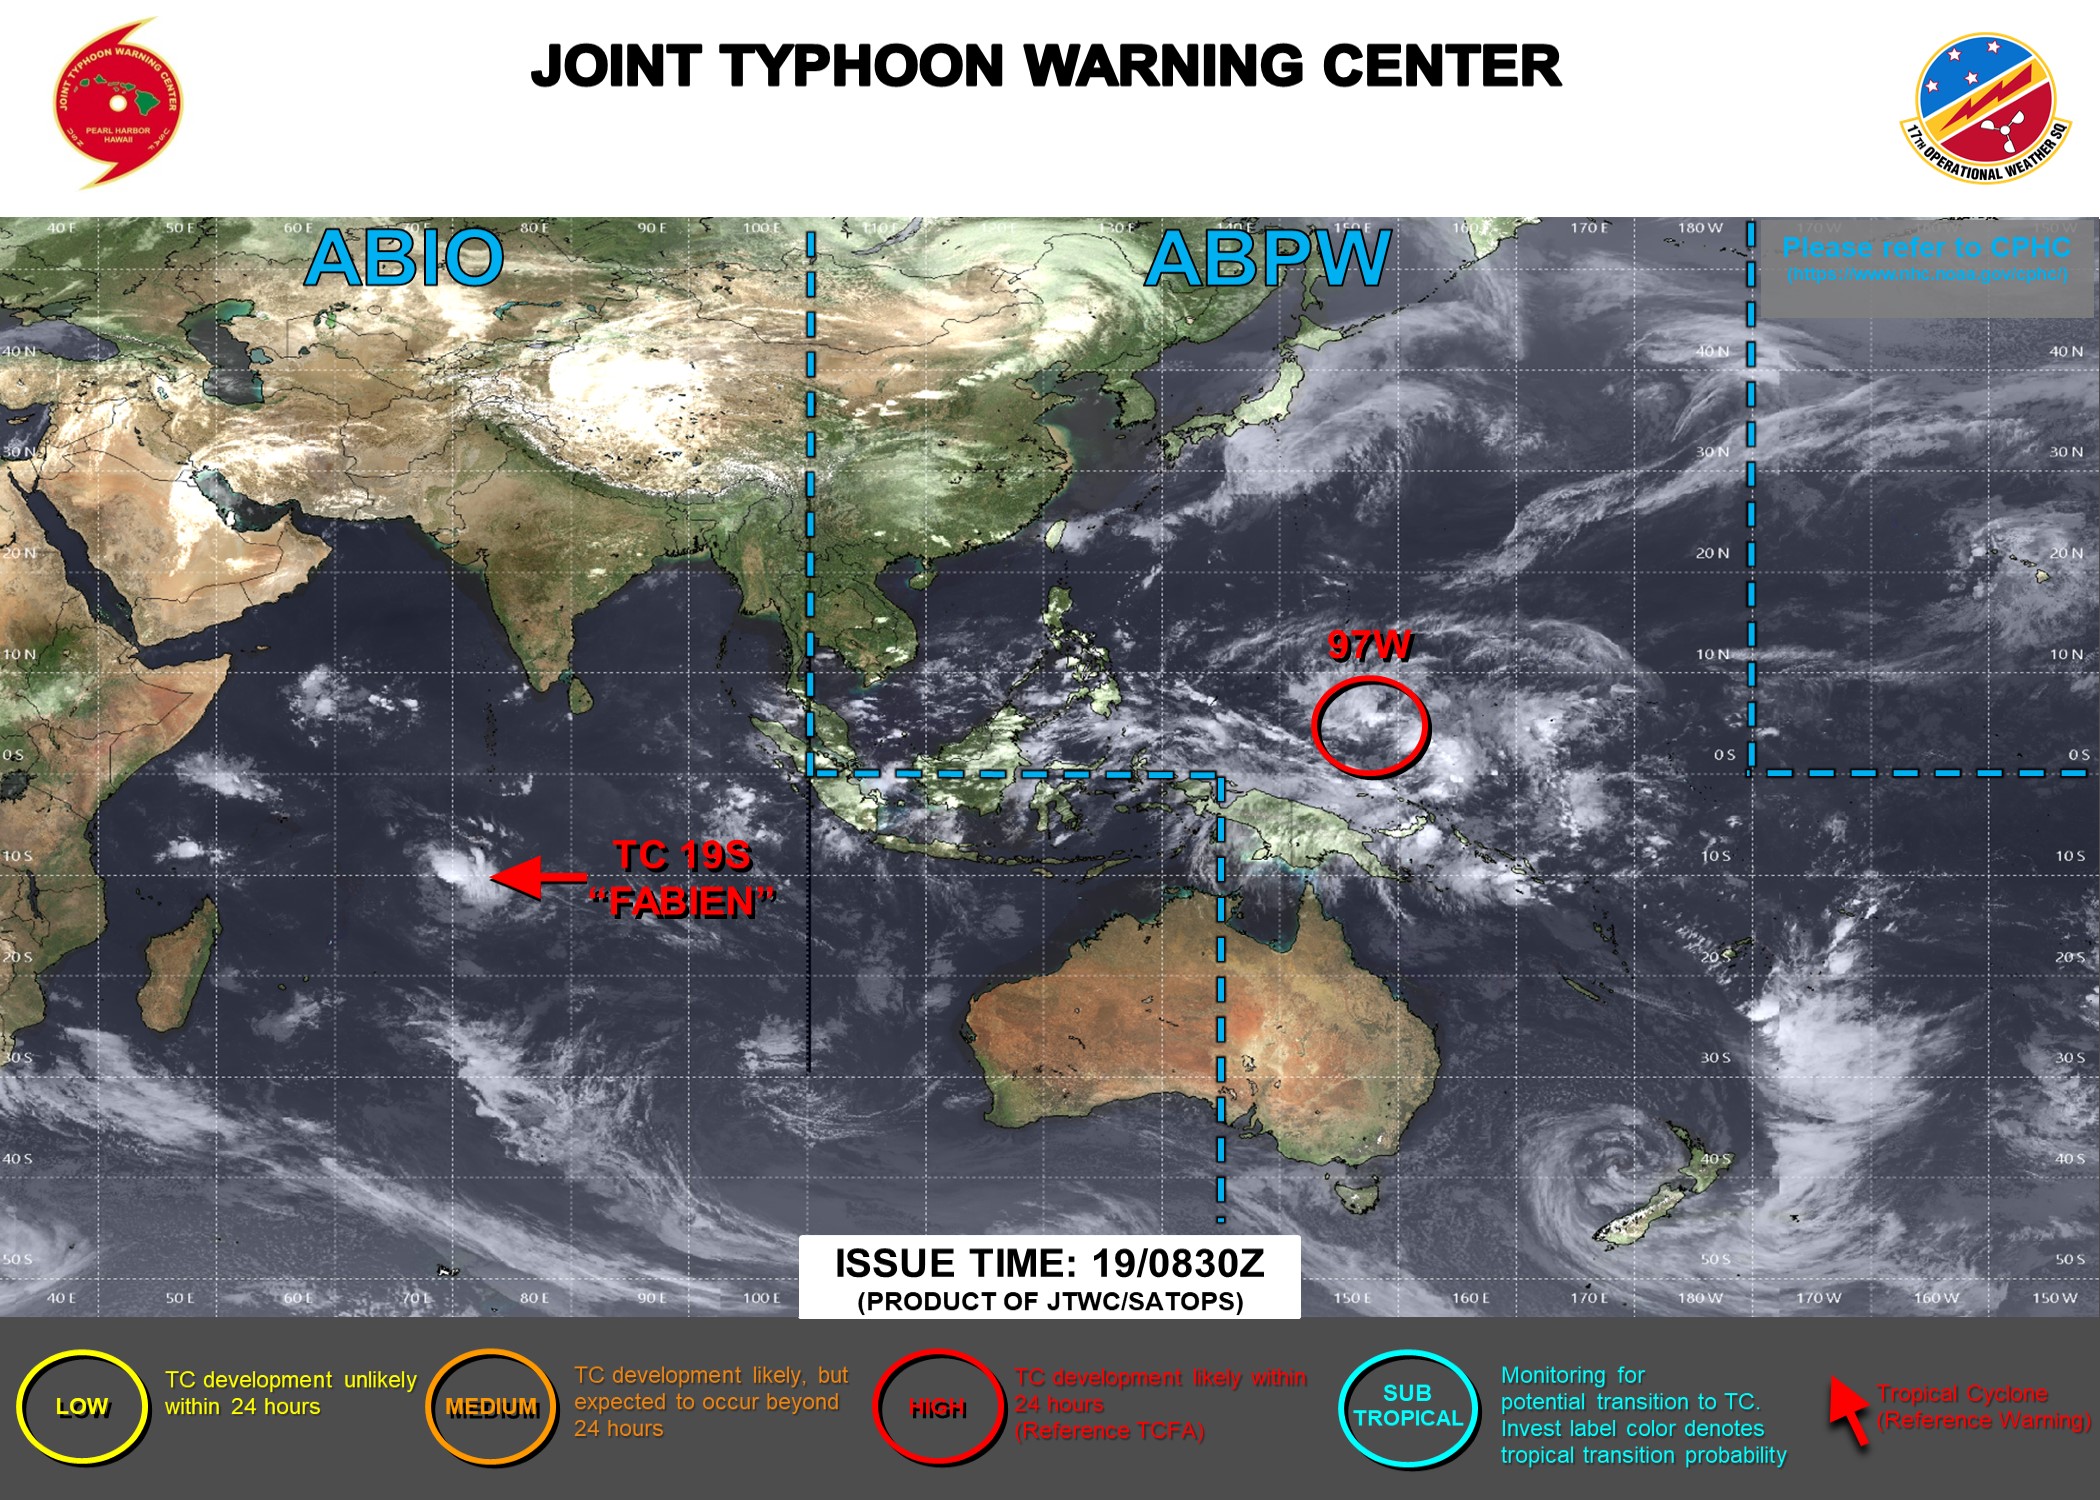 JTWC IS ISSUING 6HOURLY WARNINGS AND 3HOURLY SATELLITE BULLETINS ON TC 19S(FABIEN). 3HOURLY SATELLITE BULLETINS ARE ISSUED ON INVEST 97W.